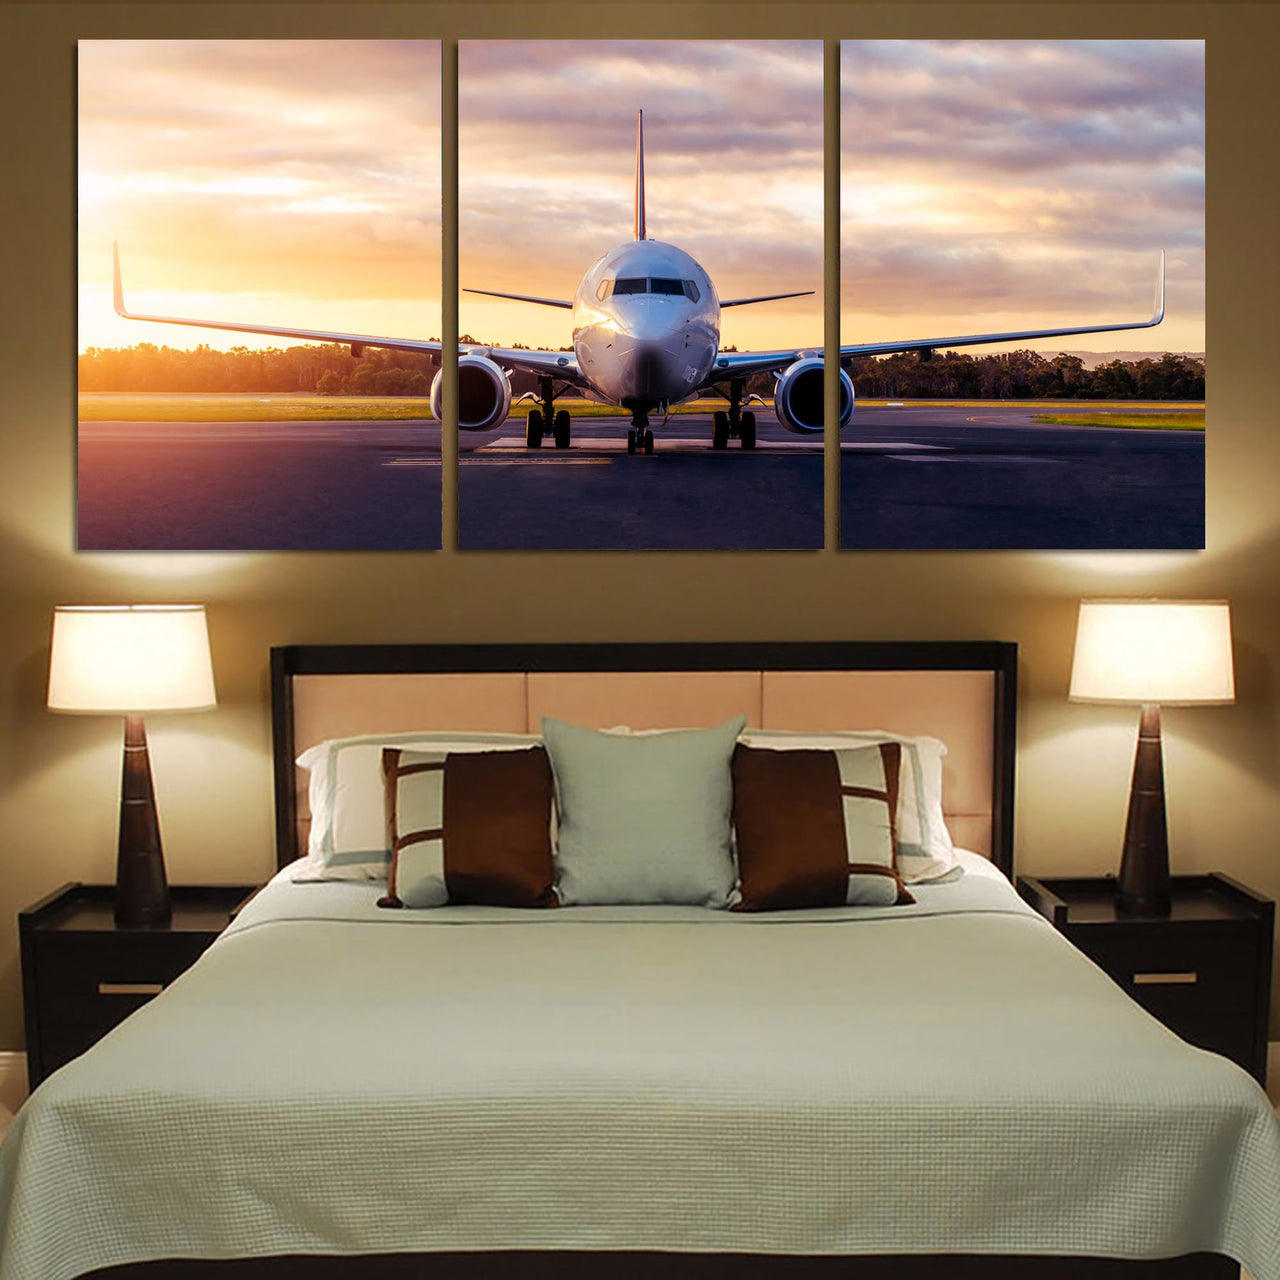 Boeing 737-800 During Sunset Printed Canvas Posters (3 Pieces)